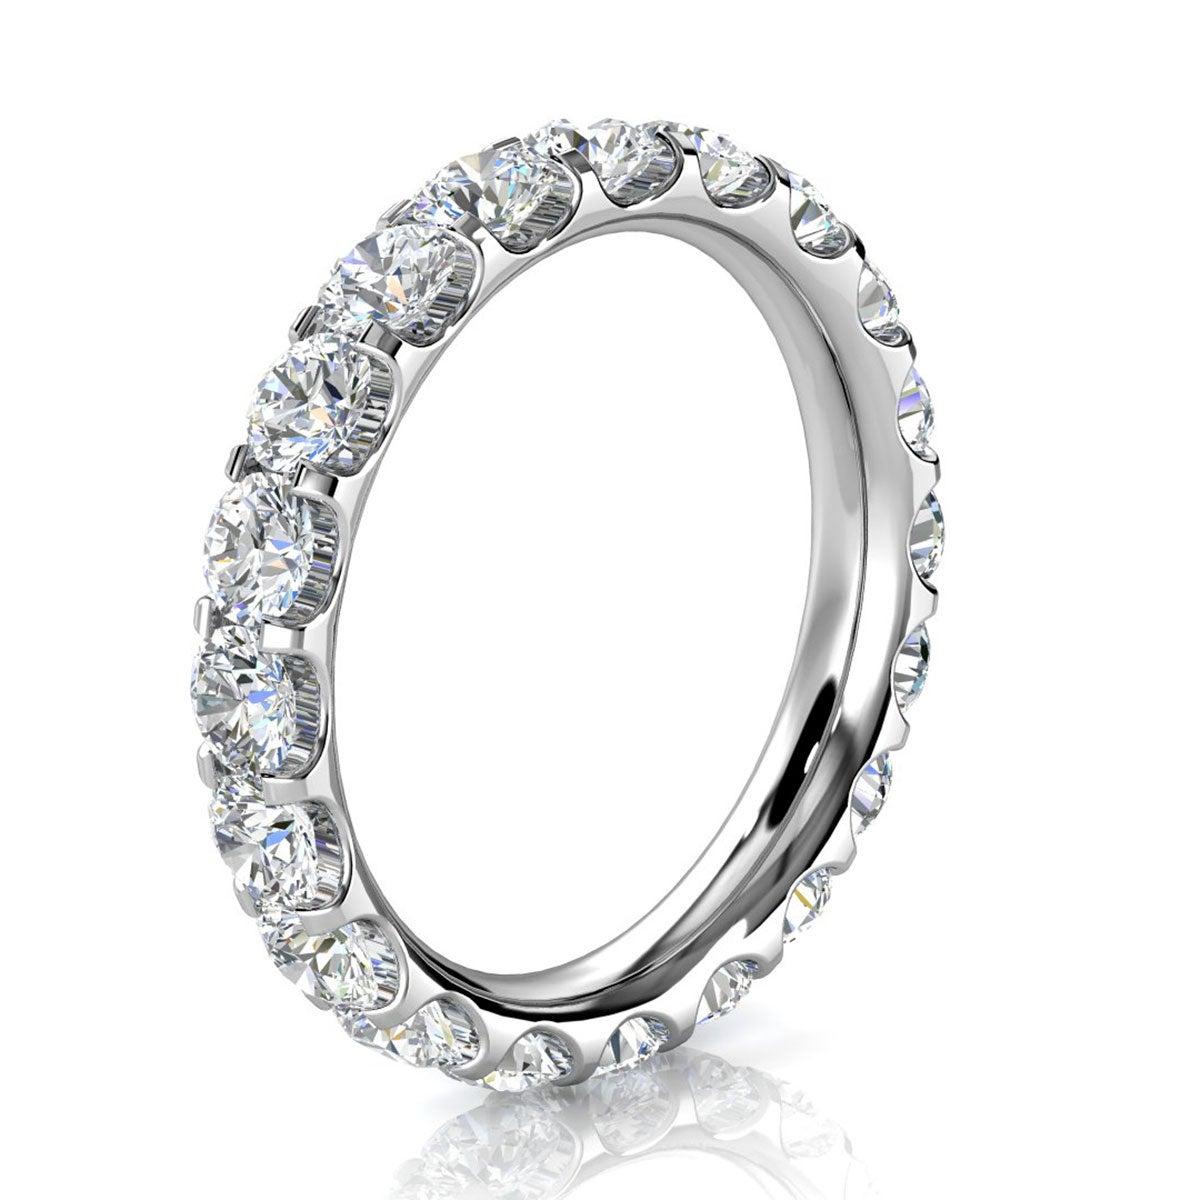 For Sale:  14k White Gold Viola Eternity Micro-Prong Diamond Ring '2 Ct. Tw' 2